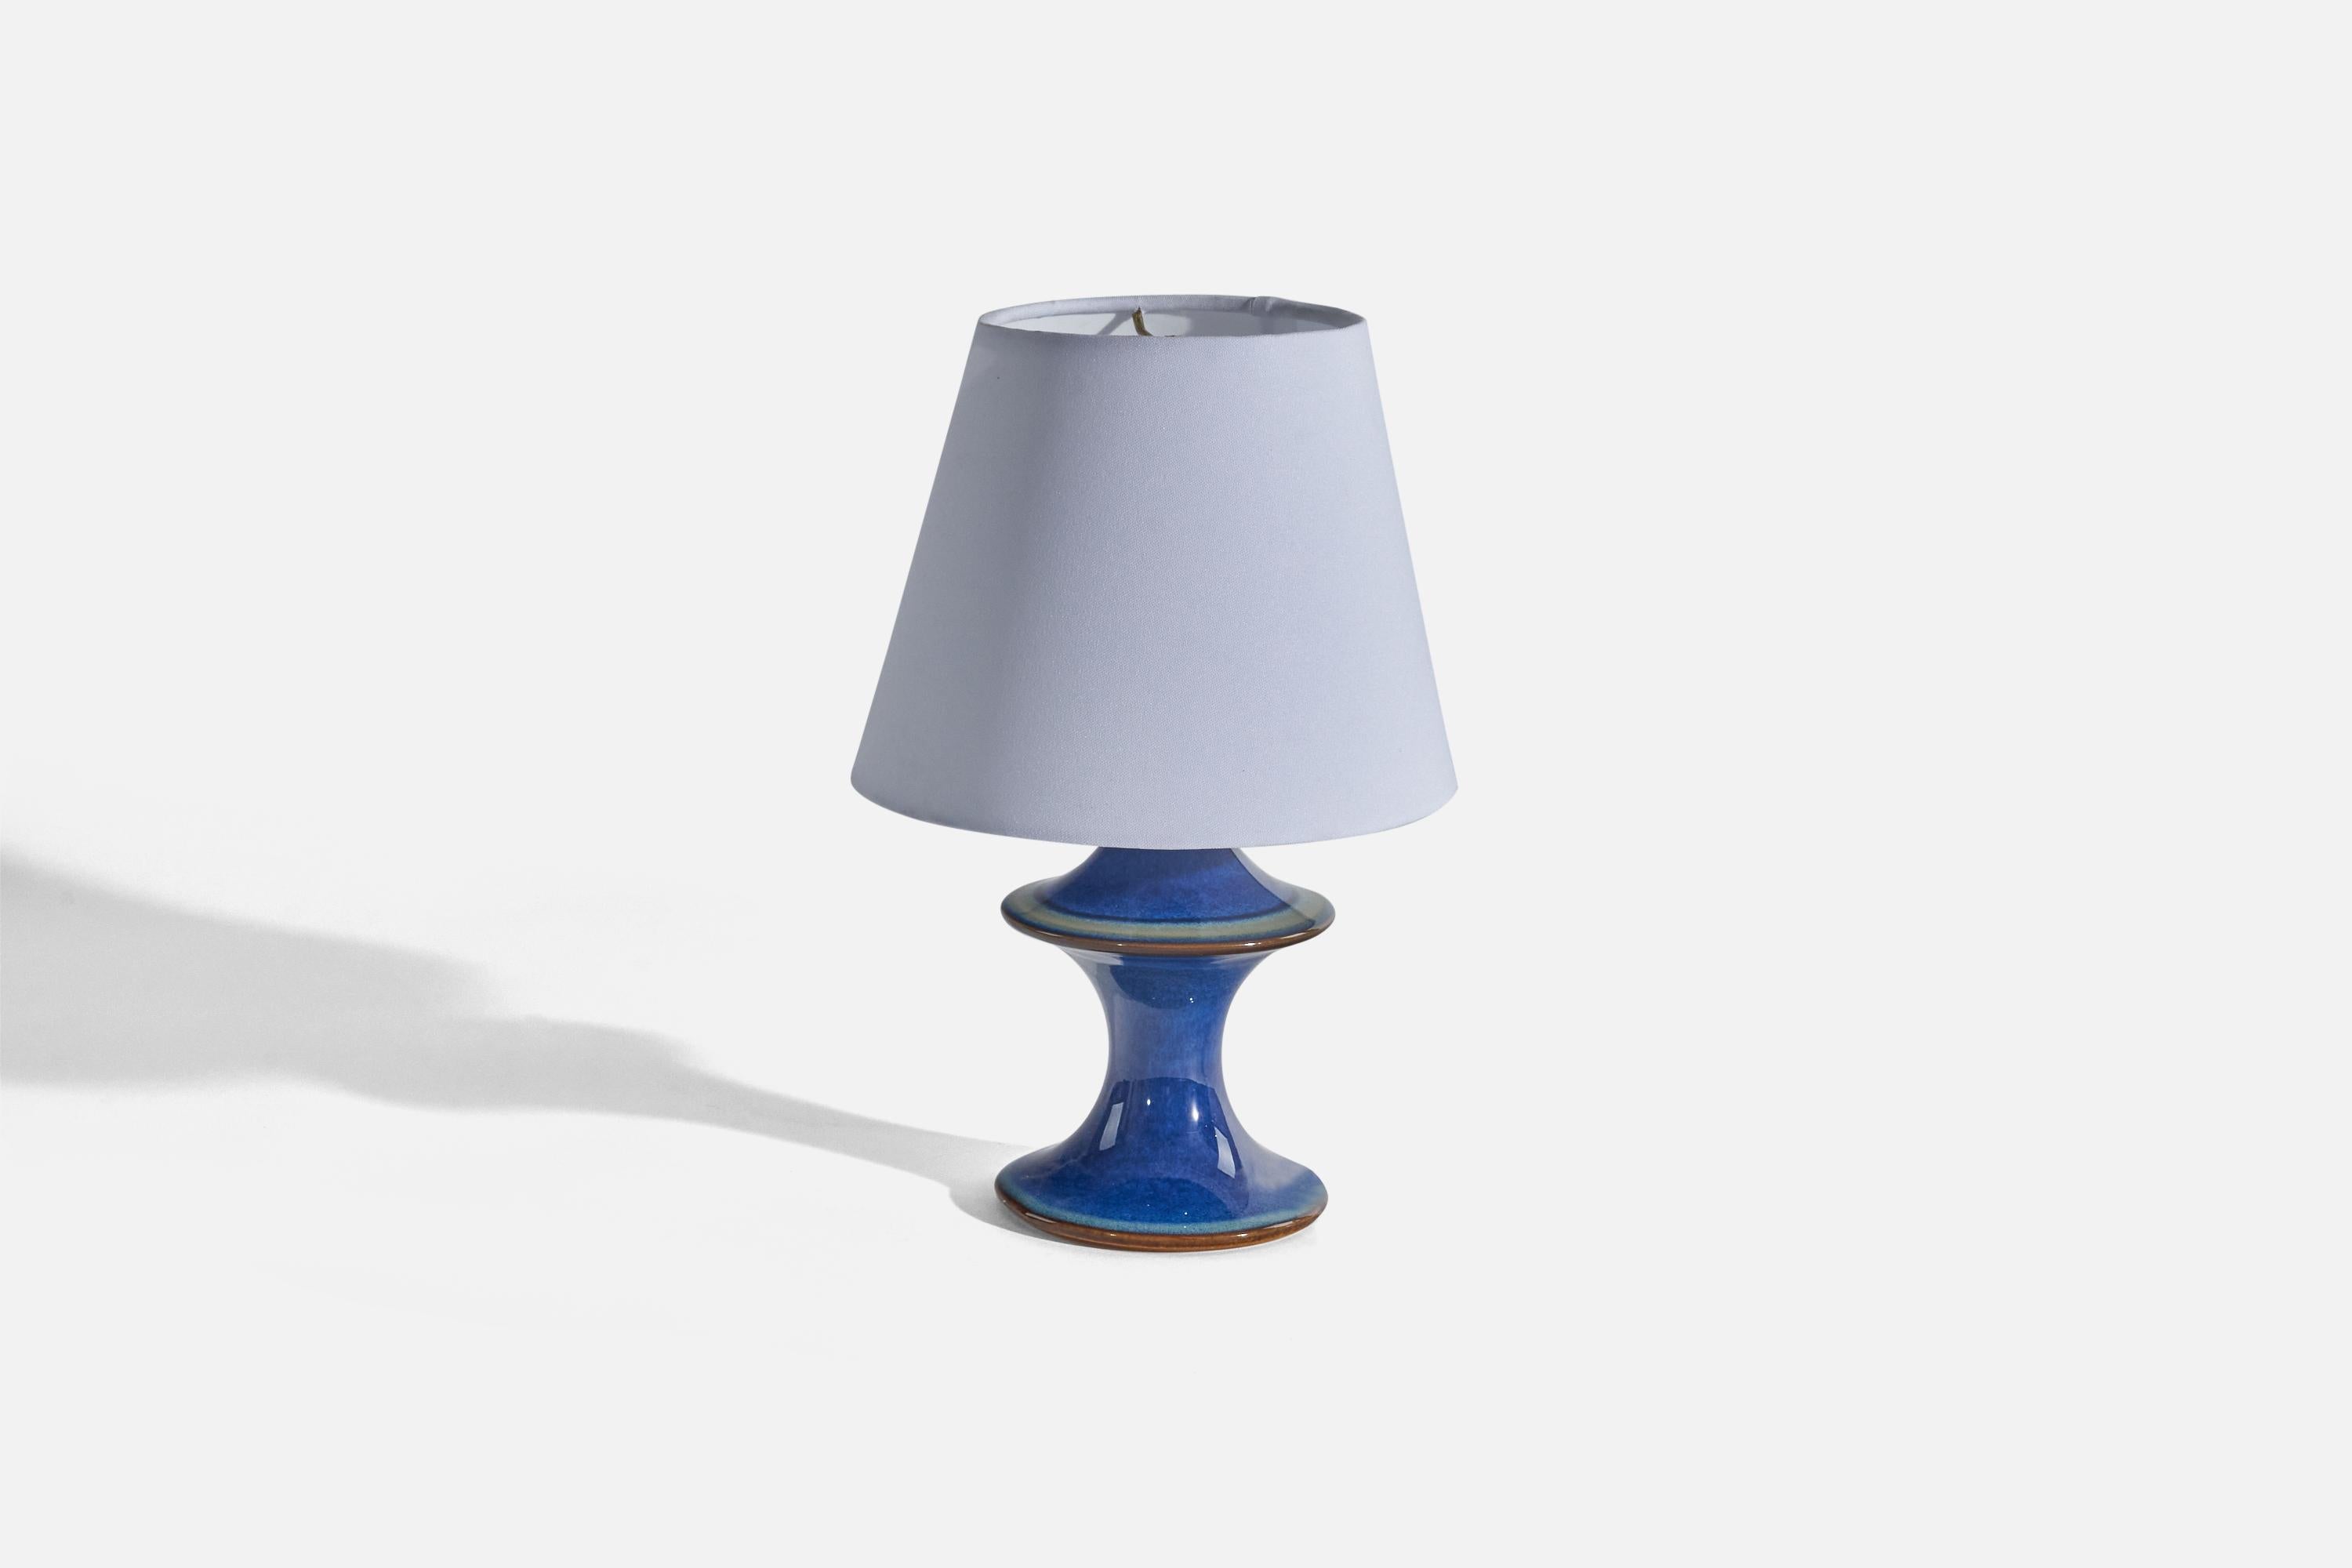 A blue-glazed stoneware table lamp designed and produced by Søholm Keramik, Bornholm, Denmark, c. 1970s. 

Sold without Lampshade(s)
Dimensions of Lamp (inches) : 8.56 x 4.62 x 4.62 (Height x Width x Depth)
Dimensions of Shade (inches) : 5.12 x 8.18